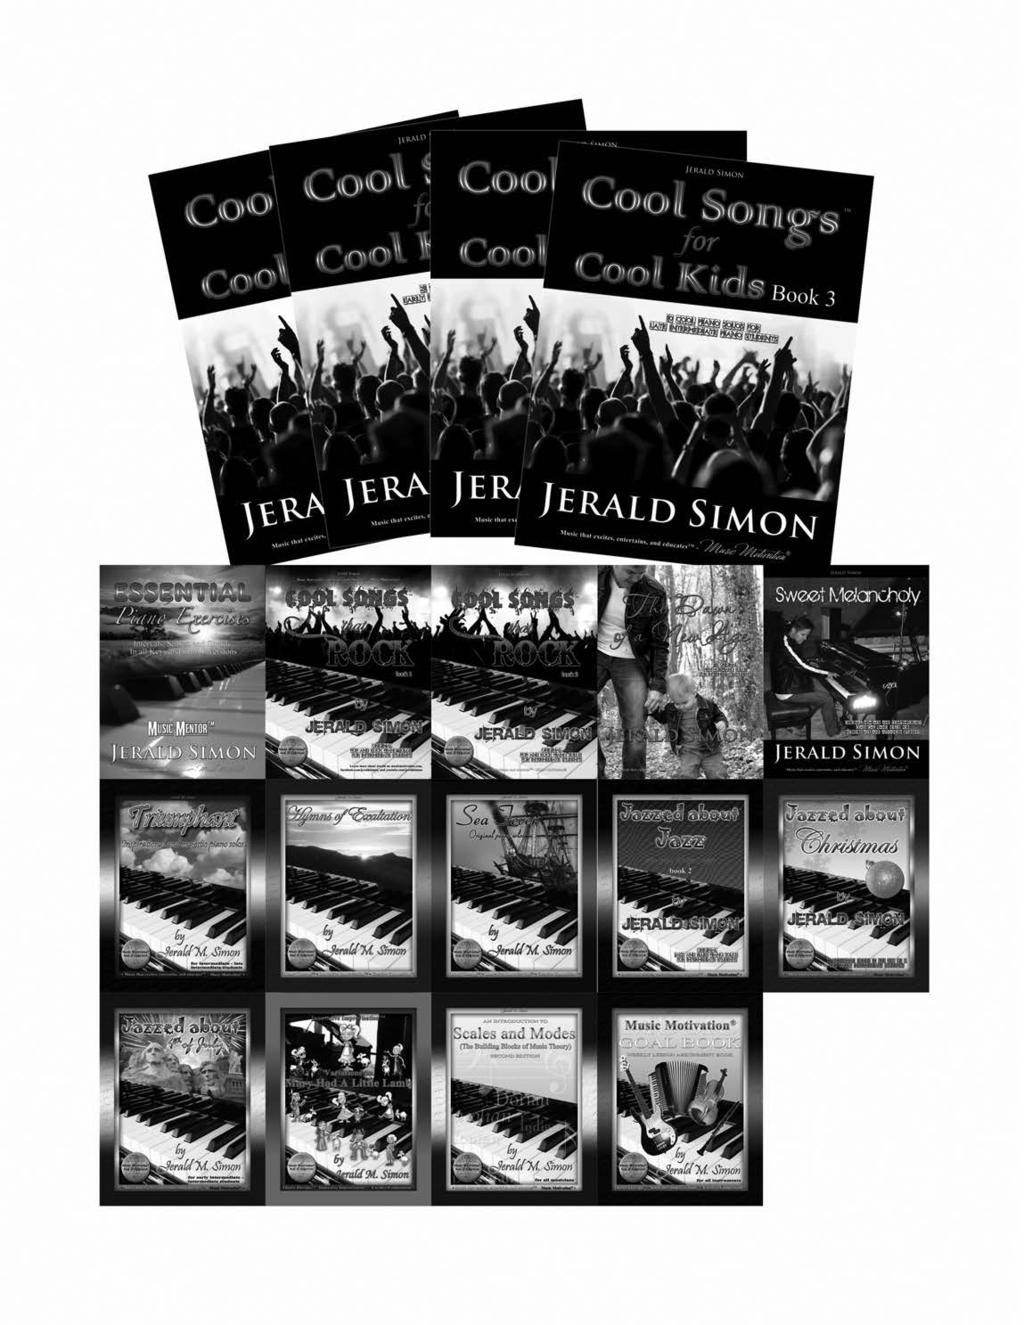 Jerald is continually coming out with new ooks and has multiple ooks planned to e released each year. Check musicmotivation.com for new ooks, CD, singles, and more.